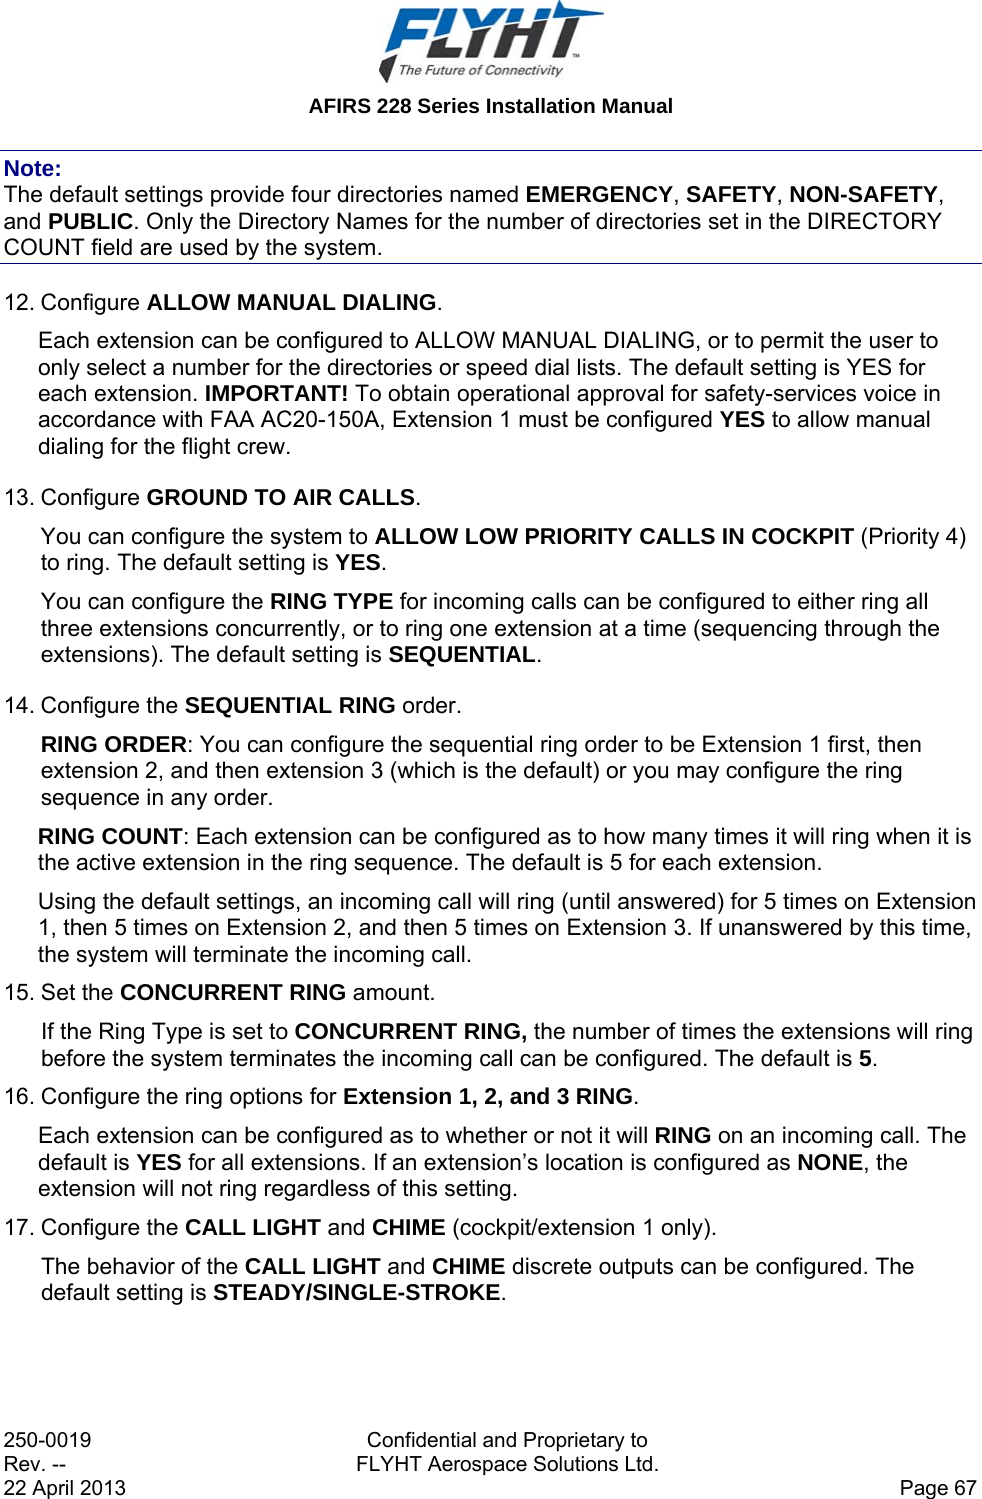  AFIRS 228 Series Installation Manual 250-0019  Confidential and Proprietary to Rev. --  FLYHT Aerospace Solutions Ltd. 22 April 2013    Page 67 Note: The default settings provide four directories named EMERGENCY, SAFETY, NON-SAFETY, and PUBLIC. Only the Directory Names for the number of directories set in the DIRECTORY COUNT field are used by the system. 12. Configure ALLOW MANUAL DIALING. Each extension can be configured to ALLOW MANUAL DIALING, or to permit the user to only select a number for the directories or speed dial lists. The default setting is YES for each extension. IMPORTANT! To obtain operational approval for safety-services voice in accordance with FAA AC20-150A, Extension 1 must be configured YES to allow manual dialing for the flight crew. 13. Configure GROUND TO AIR CALLS. You can configure the system to ALLOW LOW PRIORITY CALLS IN COCKPIT (Priority 4) to ring. The default setting is YES.  You can configure the RING TYPE for incoming calls can be configured to either ring all three extensions concurrently, or to ring one extension at a time (sequencing through the extensions). The default setting is SEQUENTIAL. 14. Configure the SEQUENTIAL RING order. RING ORDER: You can configure the sequential ring order to be Extension 1 first, then extension 2, and then extension 3 (which is the default) or you may configure the ring sequence in any order. RING COUNT: Each extension can be configured as to how many times it will ring when it is the active extension in the ring sequence. The default is 5 for each extension. Using the default settings, an incoming call will ring (until answered) for 5 times on Extension 1, then 5 times on Extension 2, and then 5 times on Extension 3. If unanswered by this time, the system will terminate the incoming call. 15. Set the CONCURRENT RING amount. If the Ring Type is set to CONCURRENT RING, the number of times the extensions will ring before the system terminates the incoming call can be configured. The default is 5. 16. Configure the ring options for Extension 1, 2, and 3 RING. Each extension can be configured as to whether or not it will RING on an incoming call. The default is YES for all extensions. If an extension’s location is configured as NONE, the extension will not ring regardless of this setting. 17. Configure the CALL LIGHT and CHIME (cockpit/extension 1 only).  The behavior of the CALL LIGHT and CHIME discrete outputs can be configured. The default setting is STEADY/SINGLE-STROKE. 